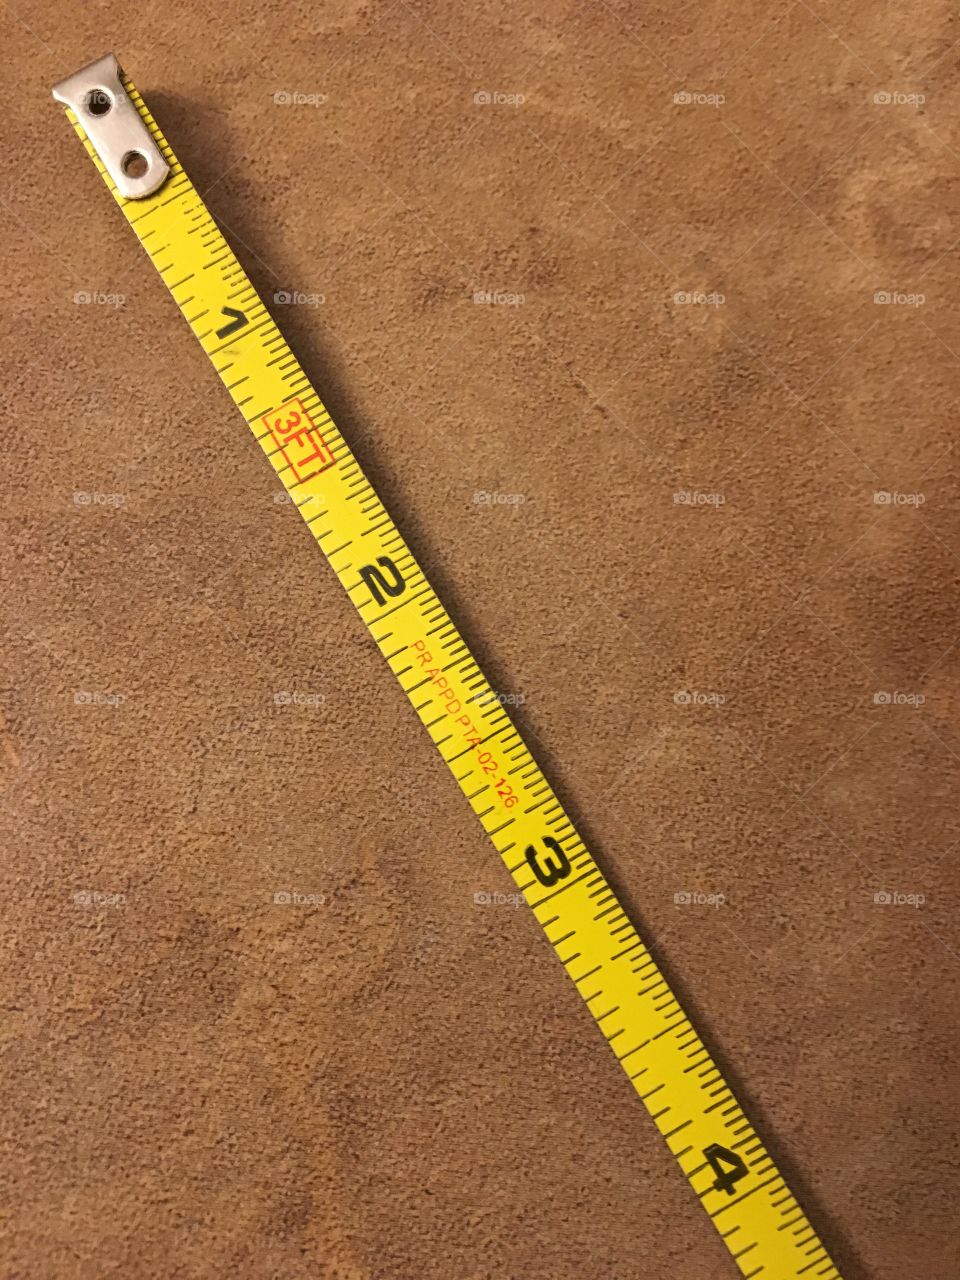 Measuring tape- inch by inch